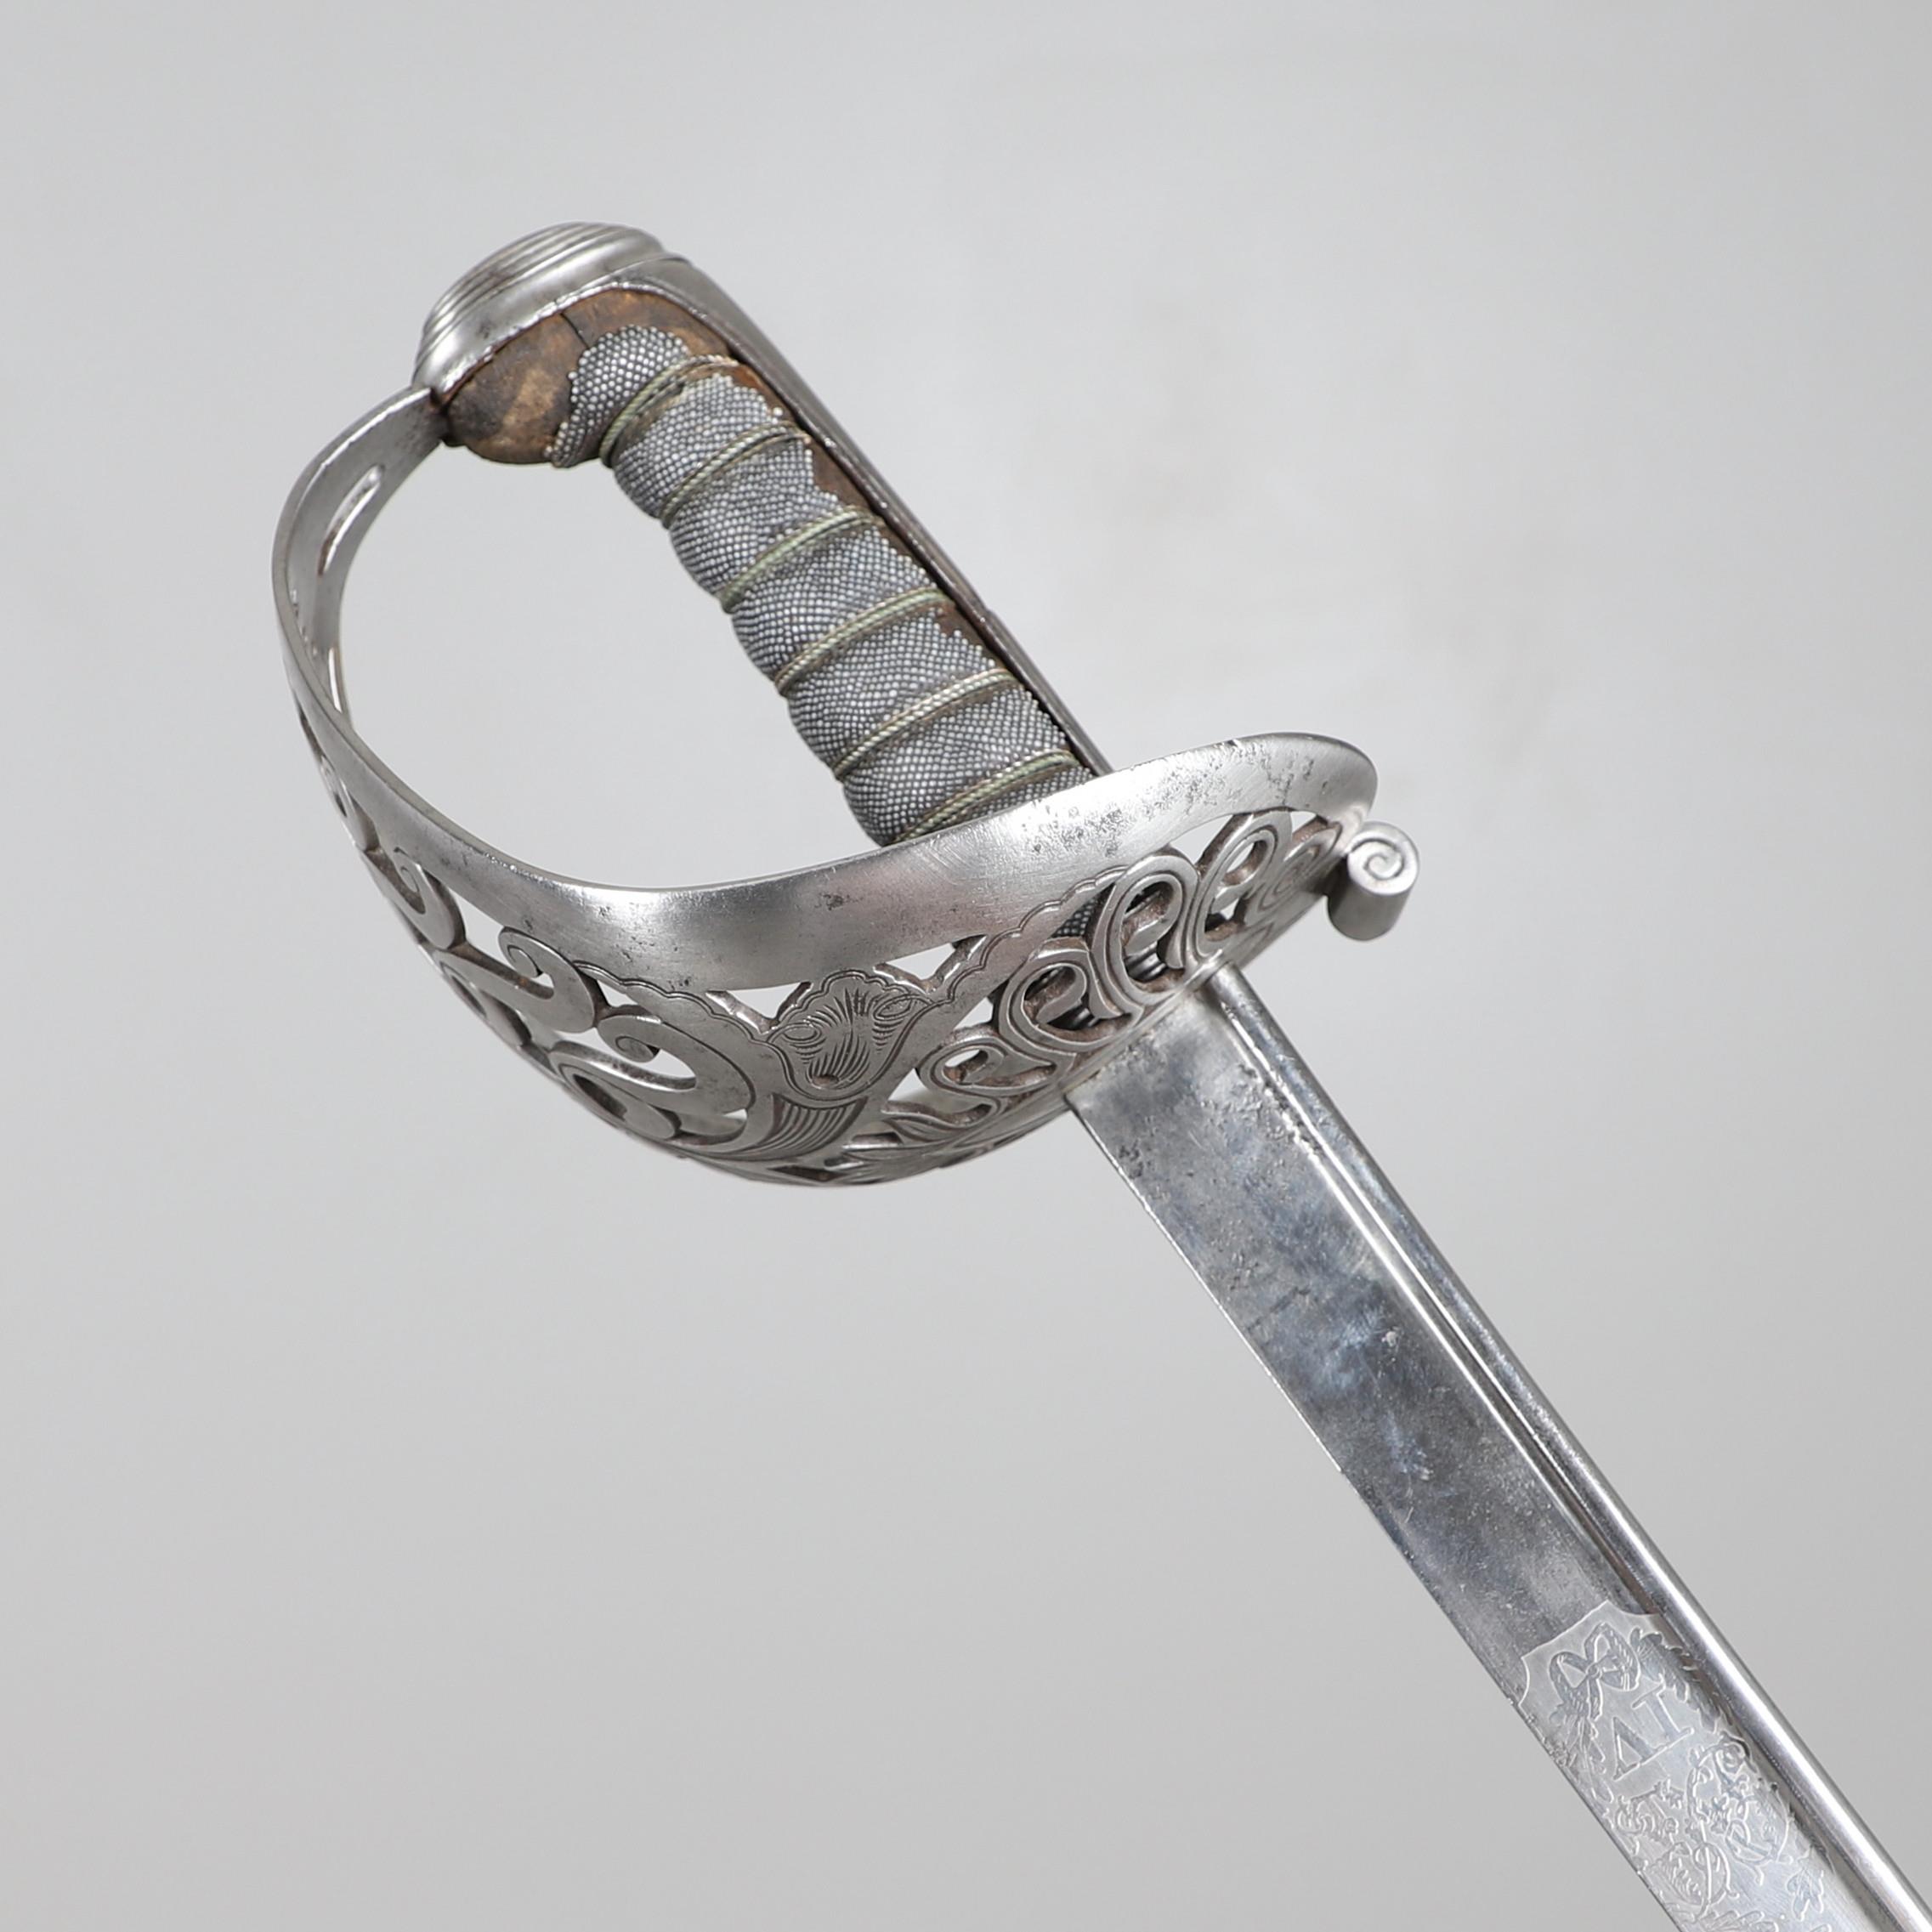 A GEORGE IV 1822 PATTERN HEAVY CAVALRY PATTERN SWORD BY ANDREWS OF PALL MALL.